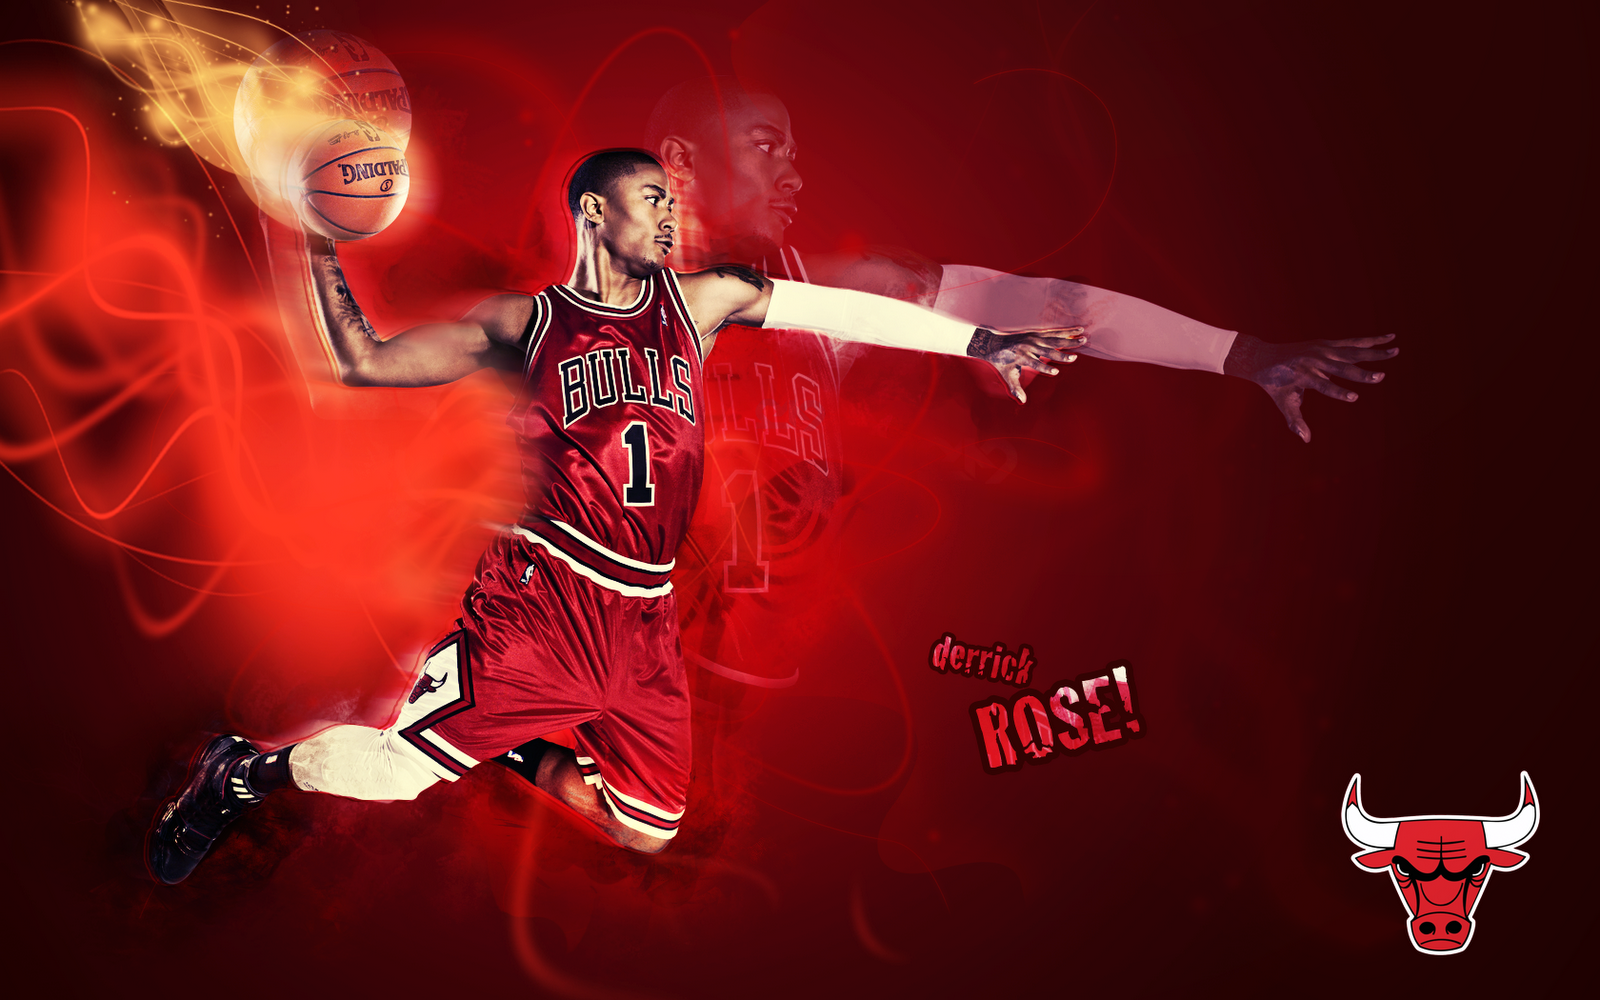 nba wallpapers,red,basketball player,football player,jersey,font